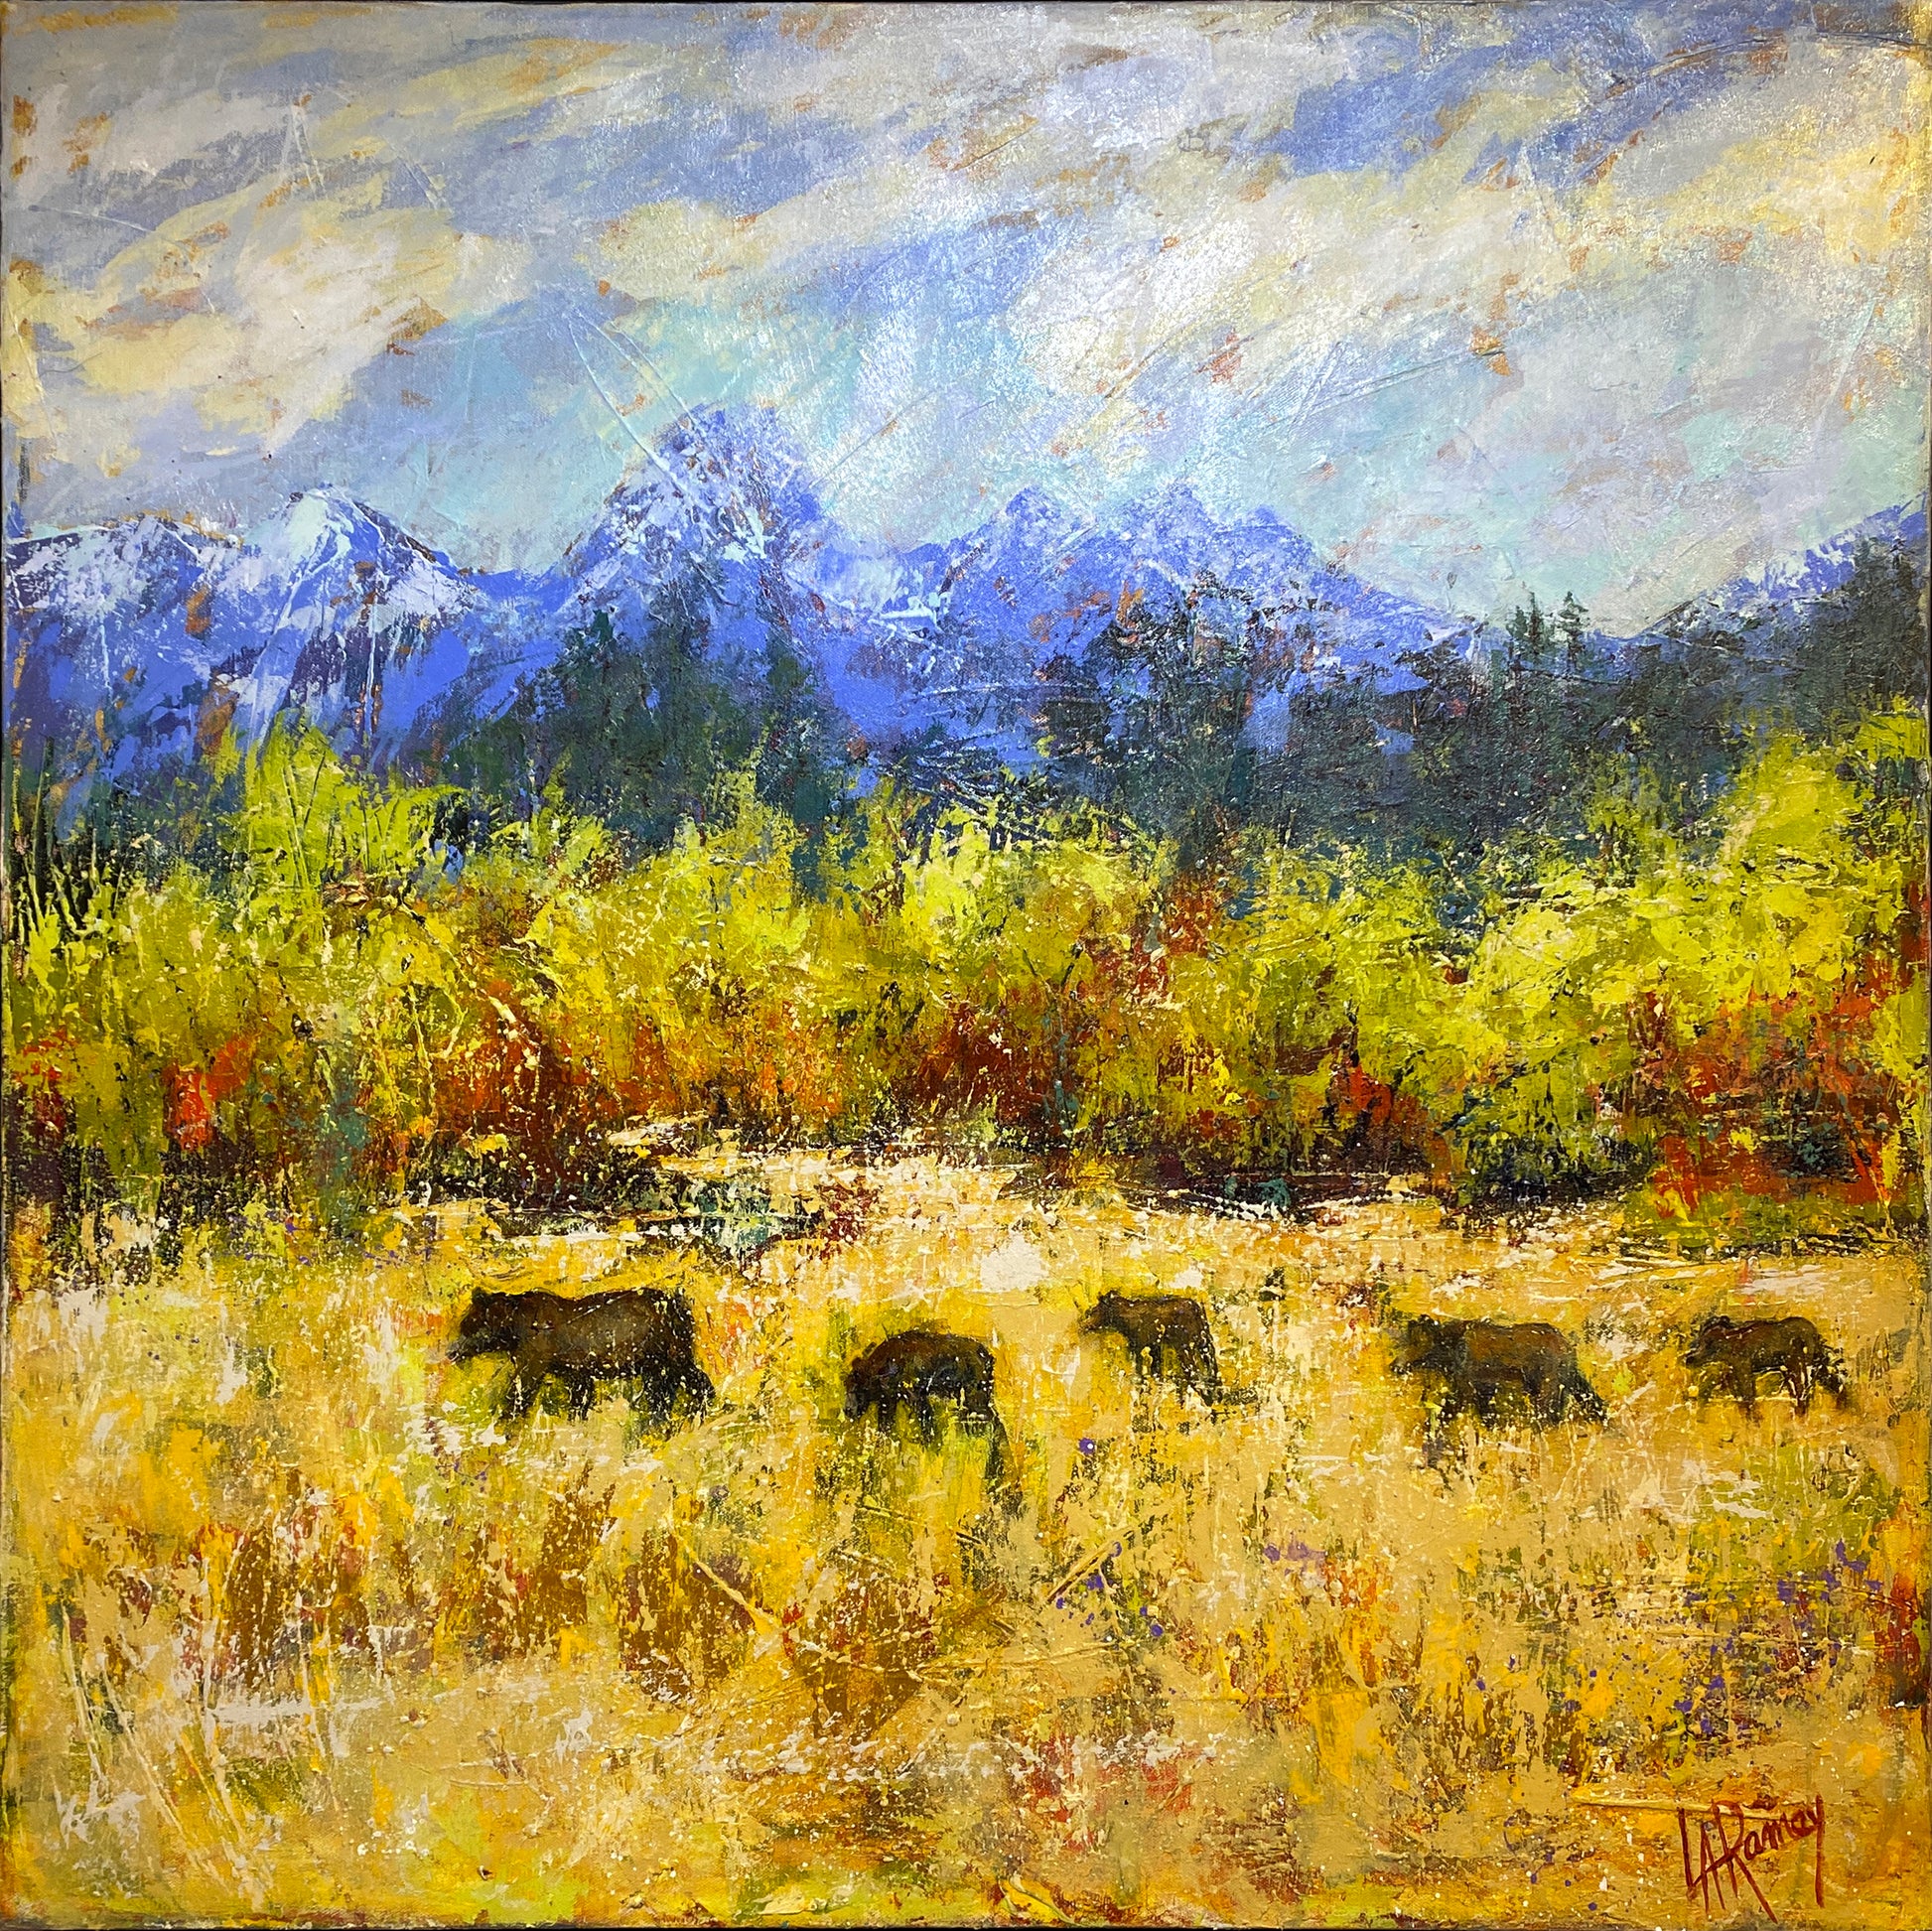 grizzly bear, willow, grand Teton national park, mountains, blue skies, clouds, painting, acrylic, grizzly cubs, grizzly bear 399, gold field, green flora, pine trees, snow capped mountains